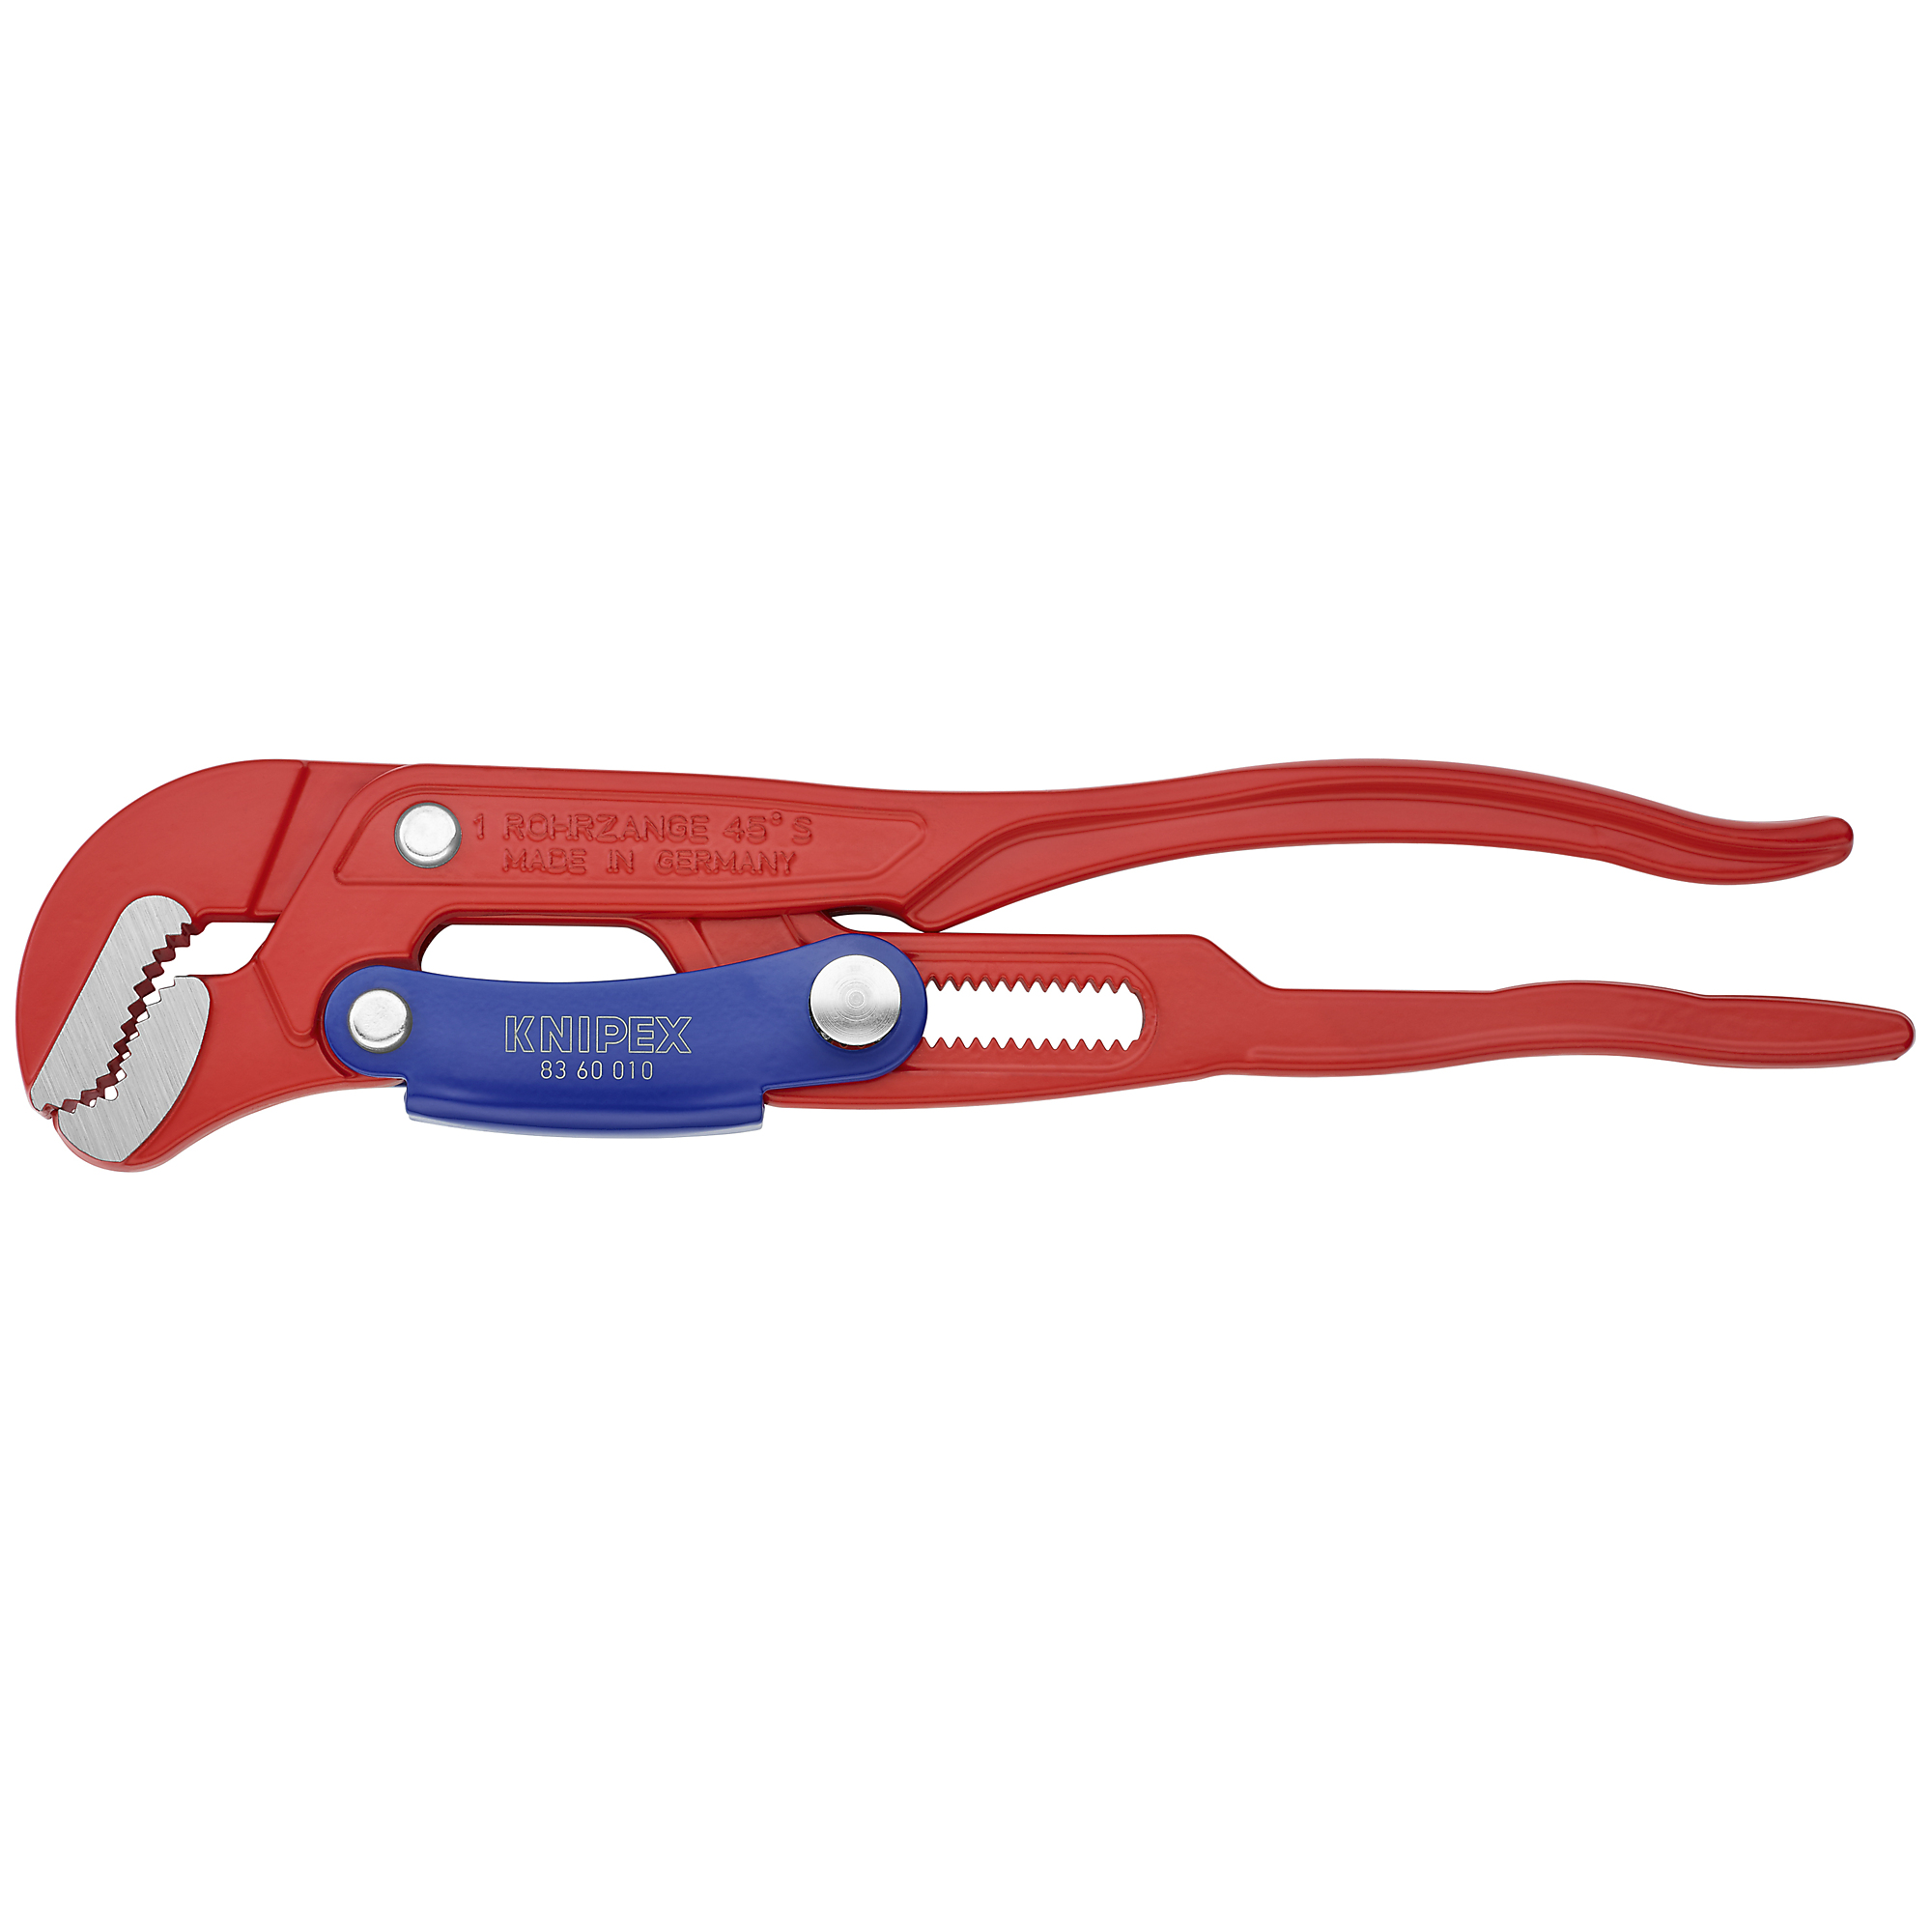 KNIPEX, Rapid Adjust Swedish Pipe Wrench-S-Type, 12.75Inch, Pieces (qty.) 1 Material Steel, Jaw Capacity 1.66 in, Model 83 60 010